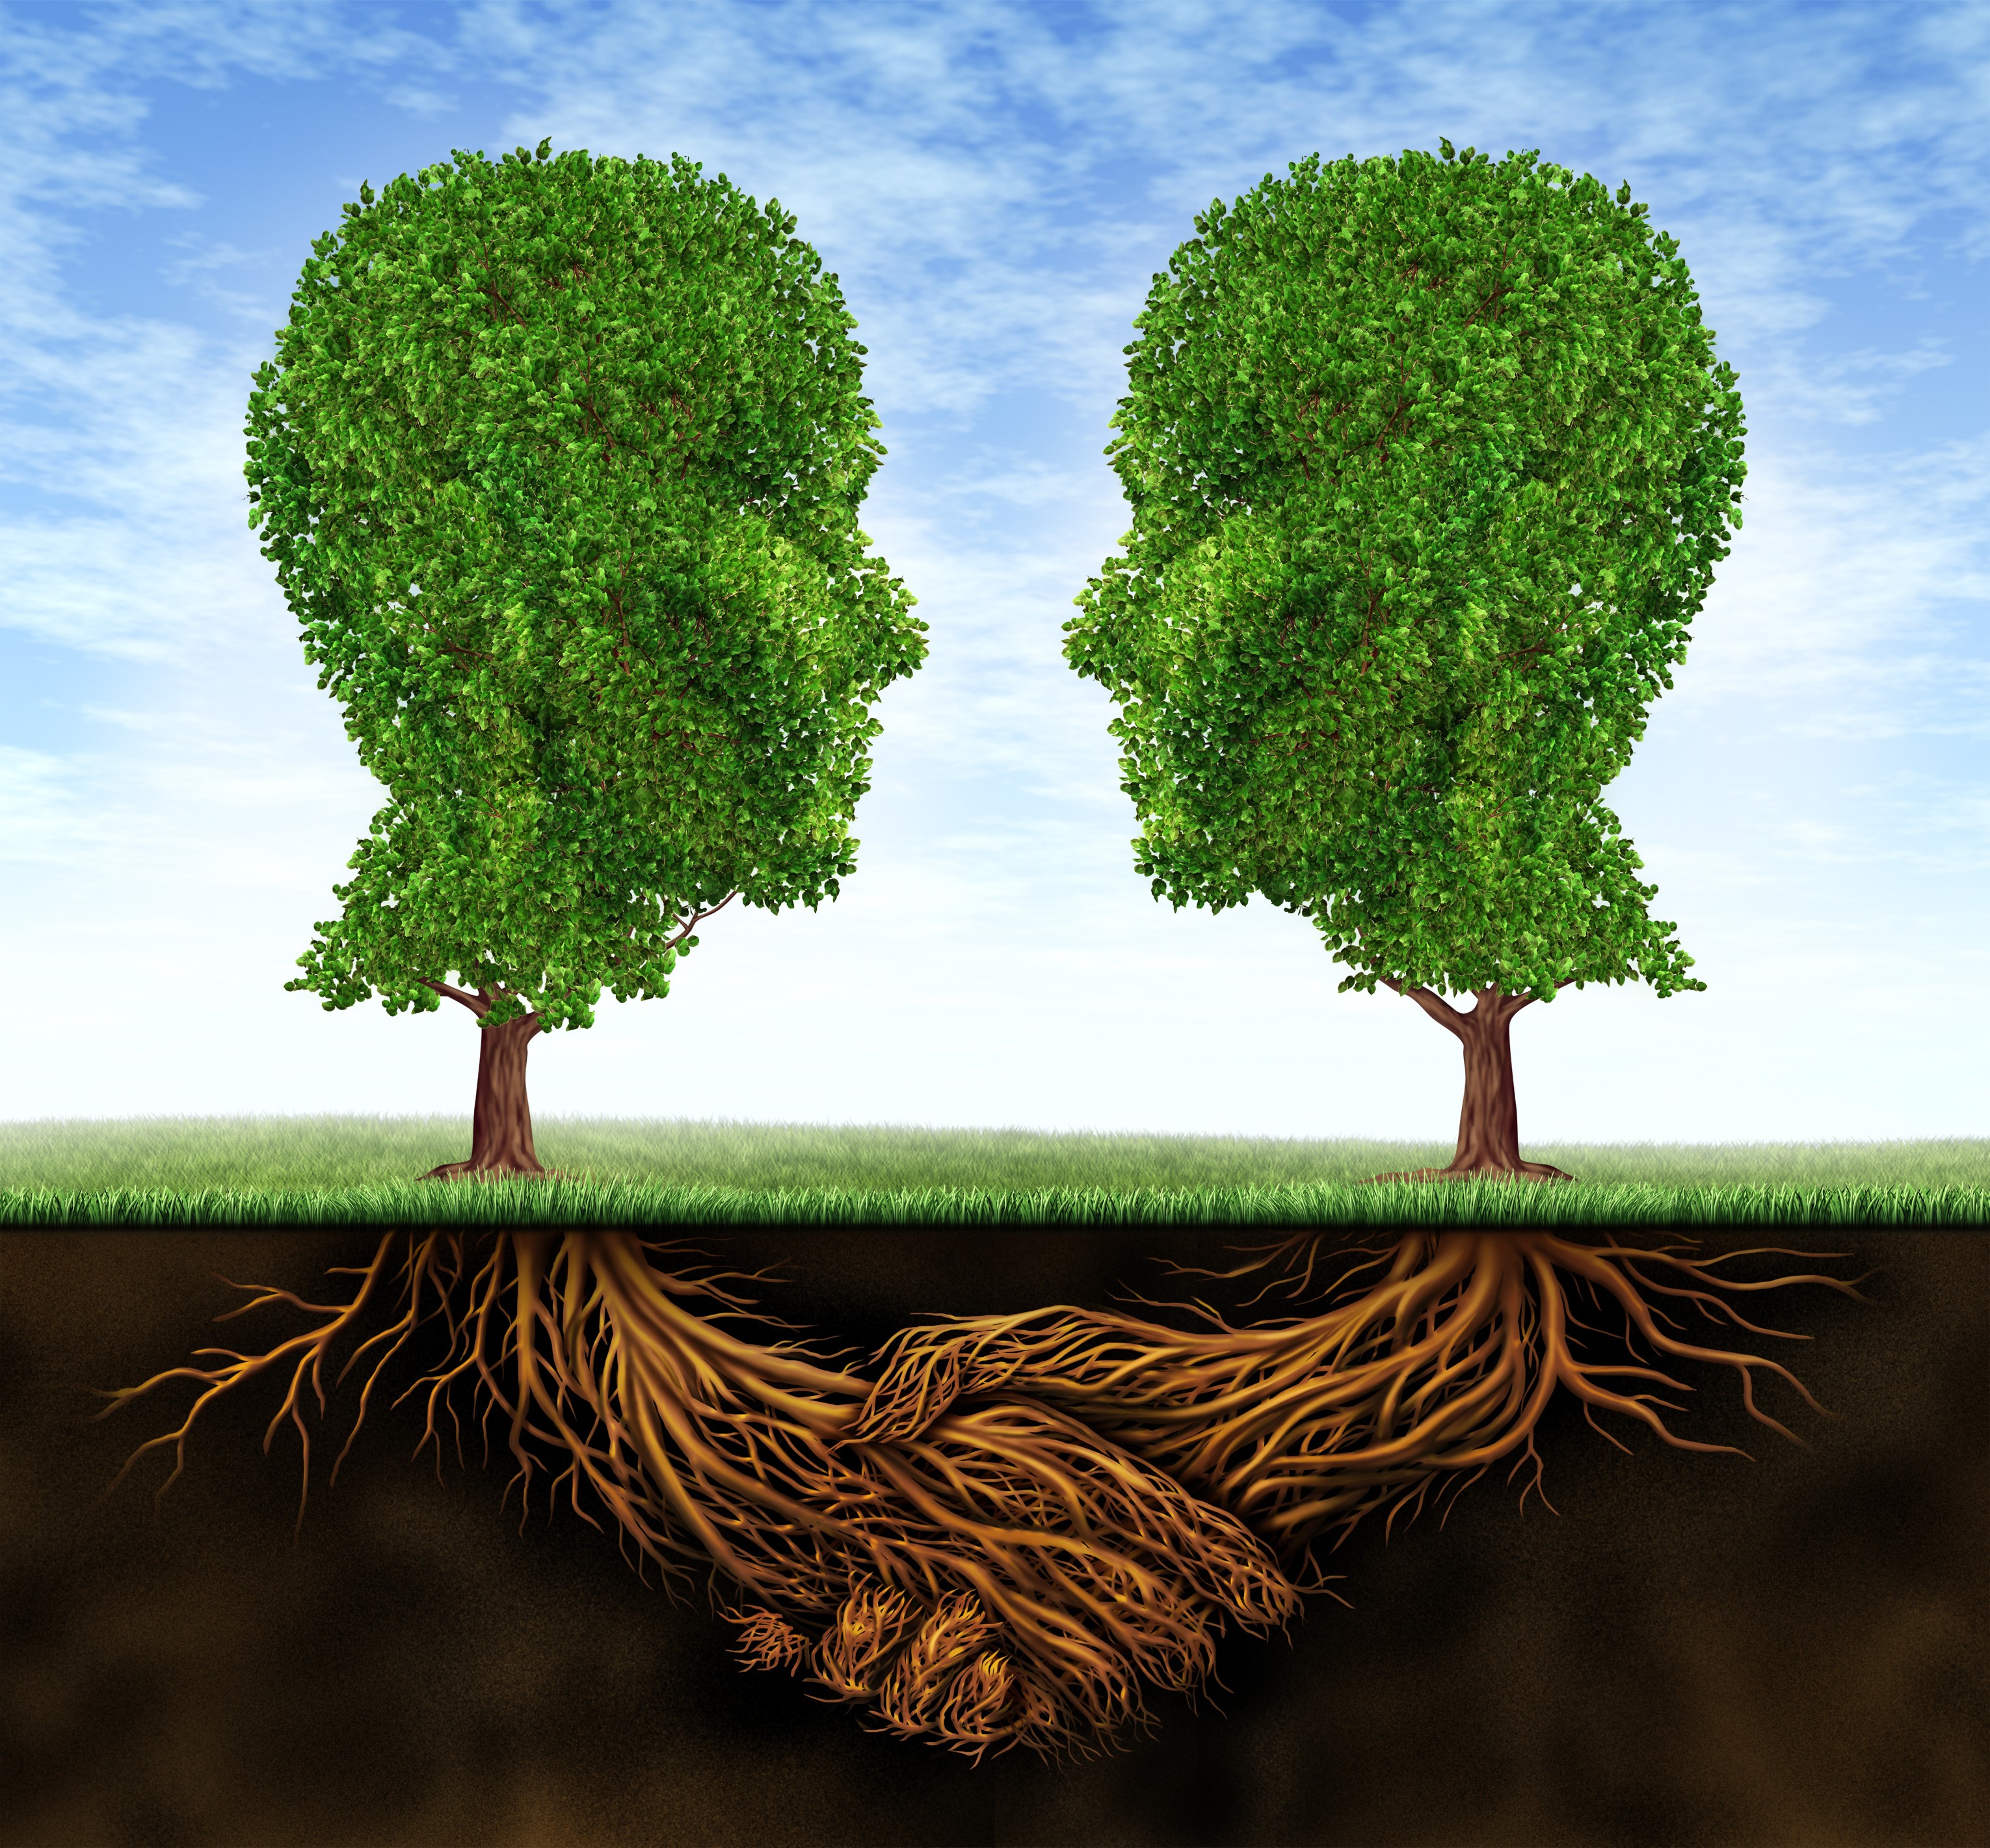 Business collaboration teamwork and growth with roots in the shape of a hand shake and trees as human heads for trust and integrity in a growing financial relationship for strong wealth success.